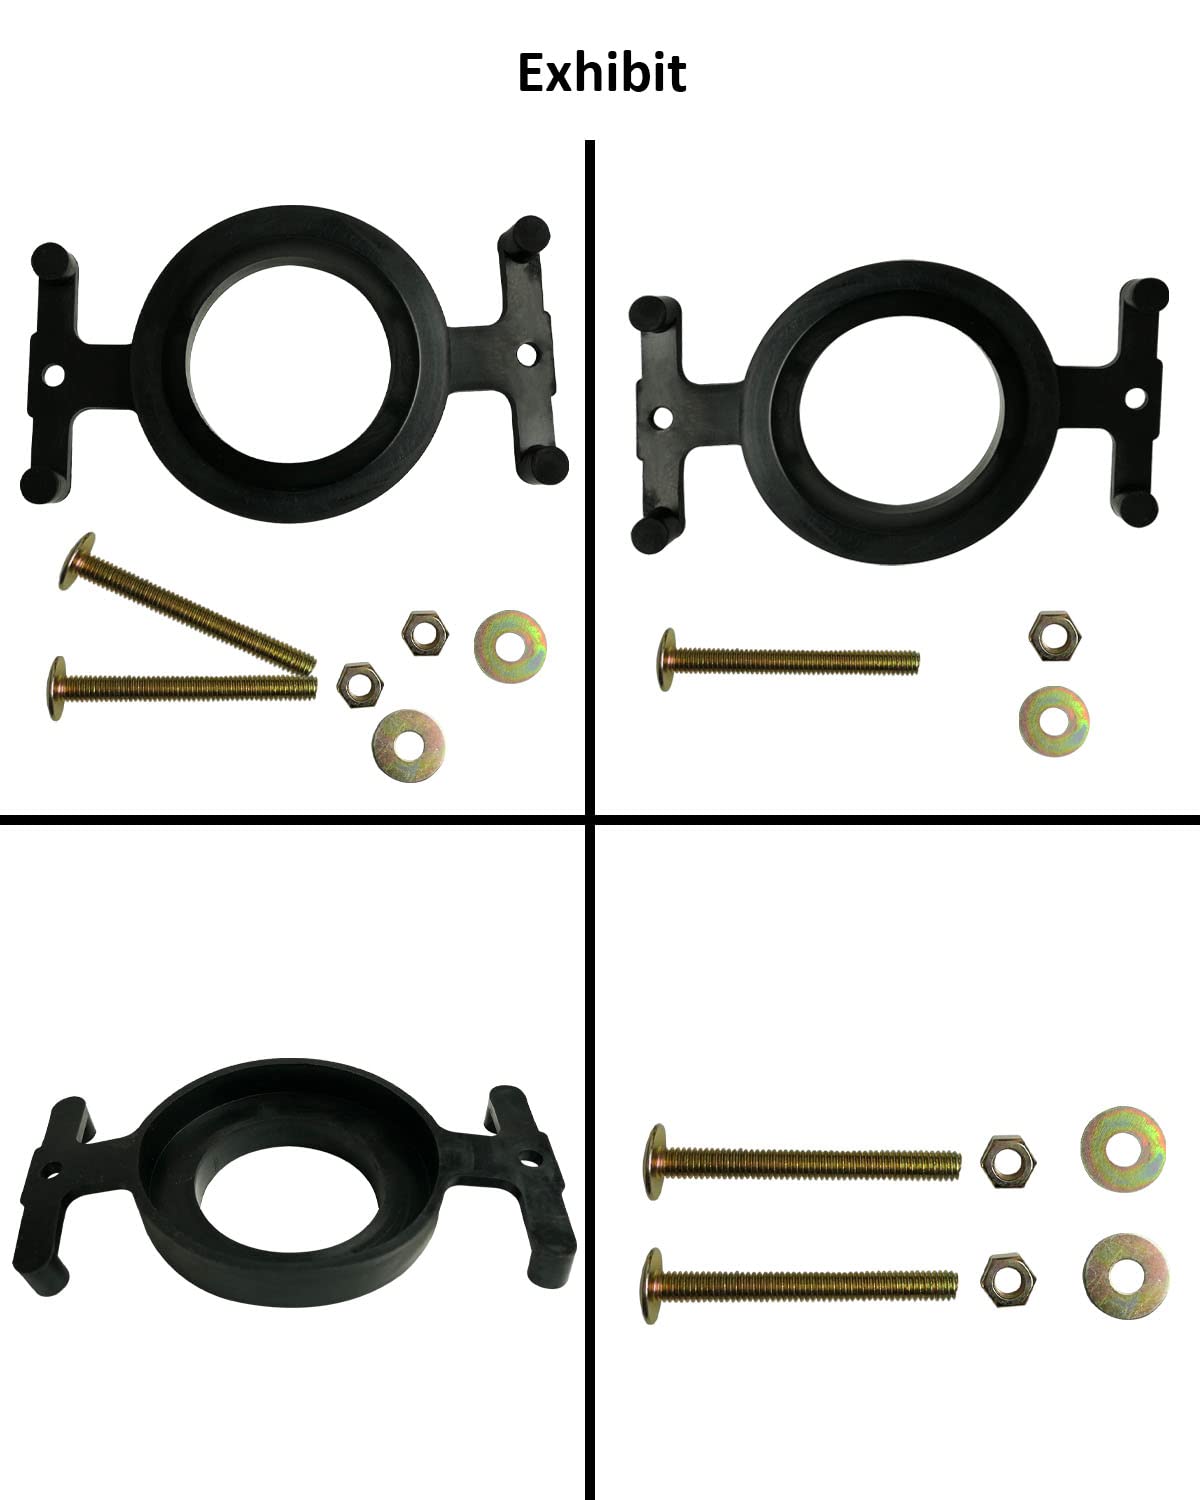 Generic 04-3817 Toilet Tank to Bowl Bolt Set Fit for Eljer Toilet and Most Flush Valve Opening Toilet Tanks with Gasket Solid Brass Kit